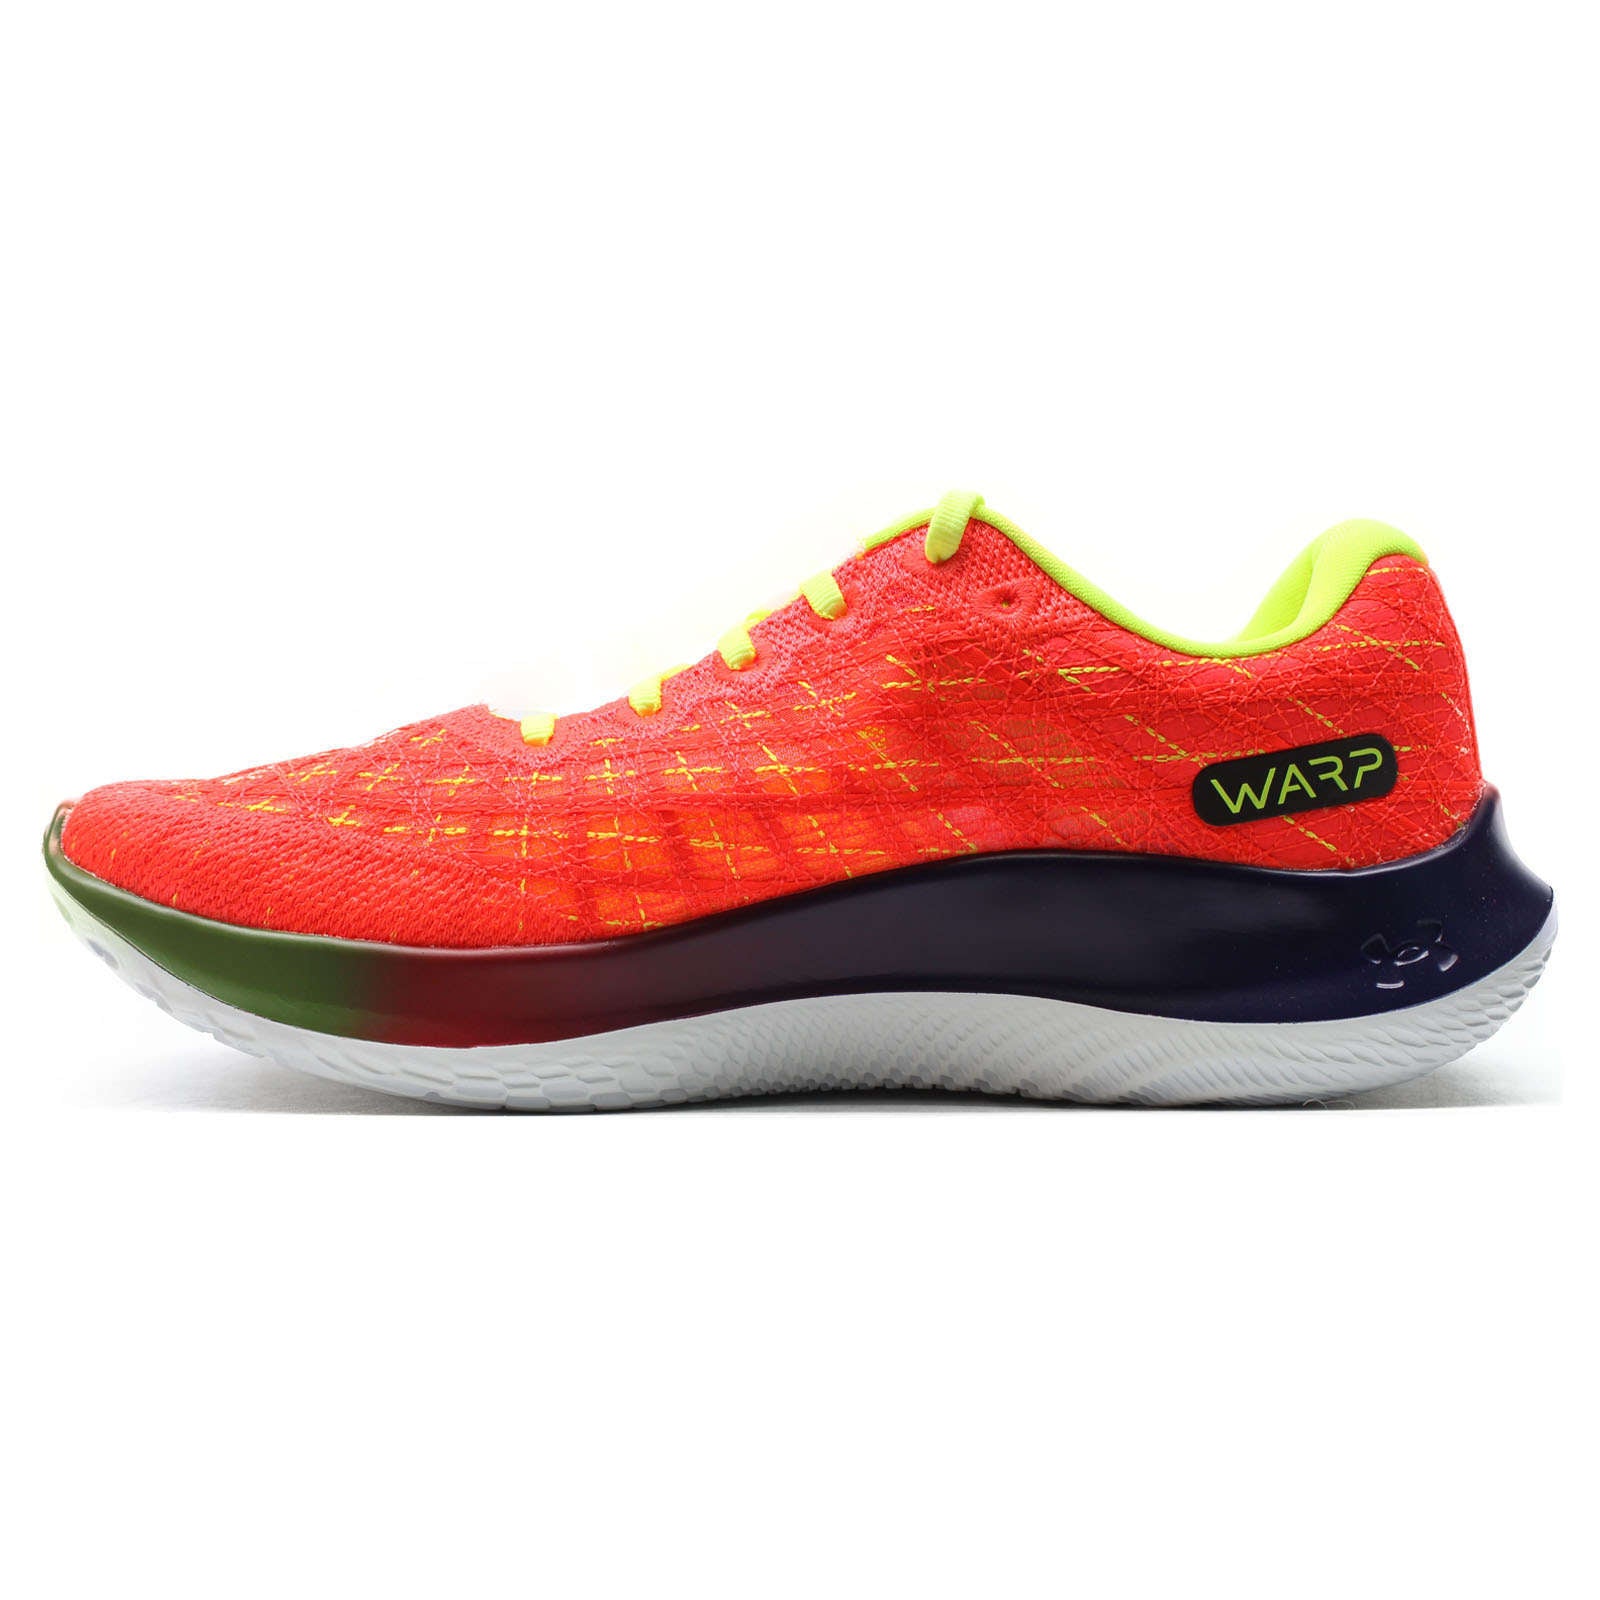 Under Armour Flow Velociti Wind Rn Synthetic Textile Unisex Low-Top Trainers#color_orange yellow